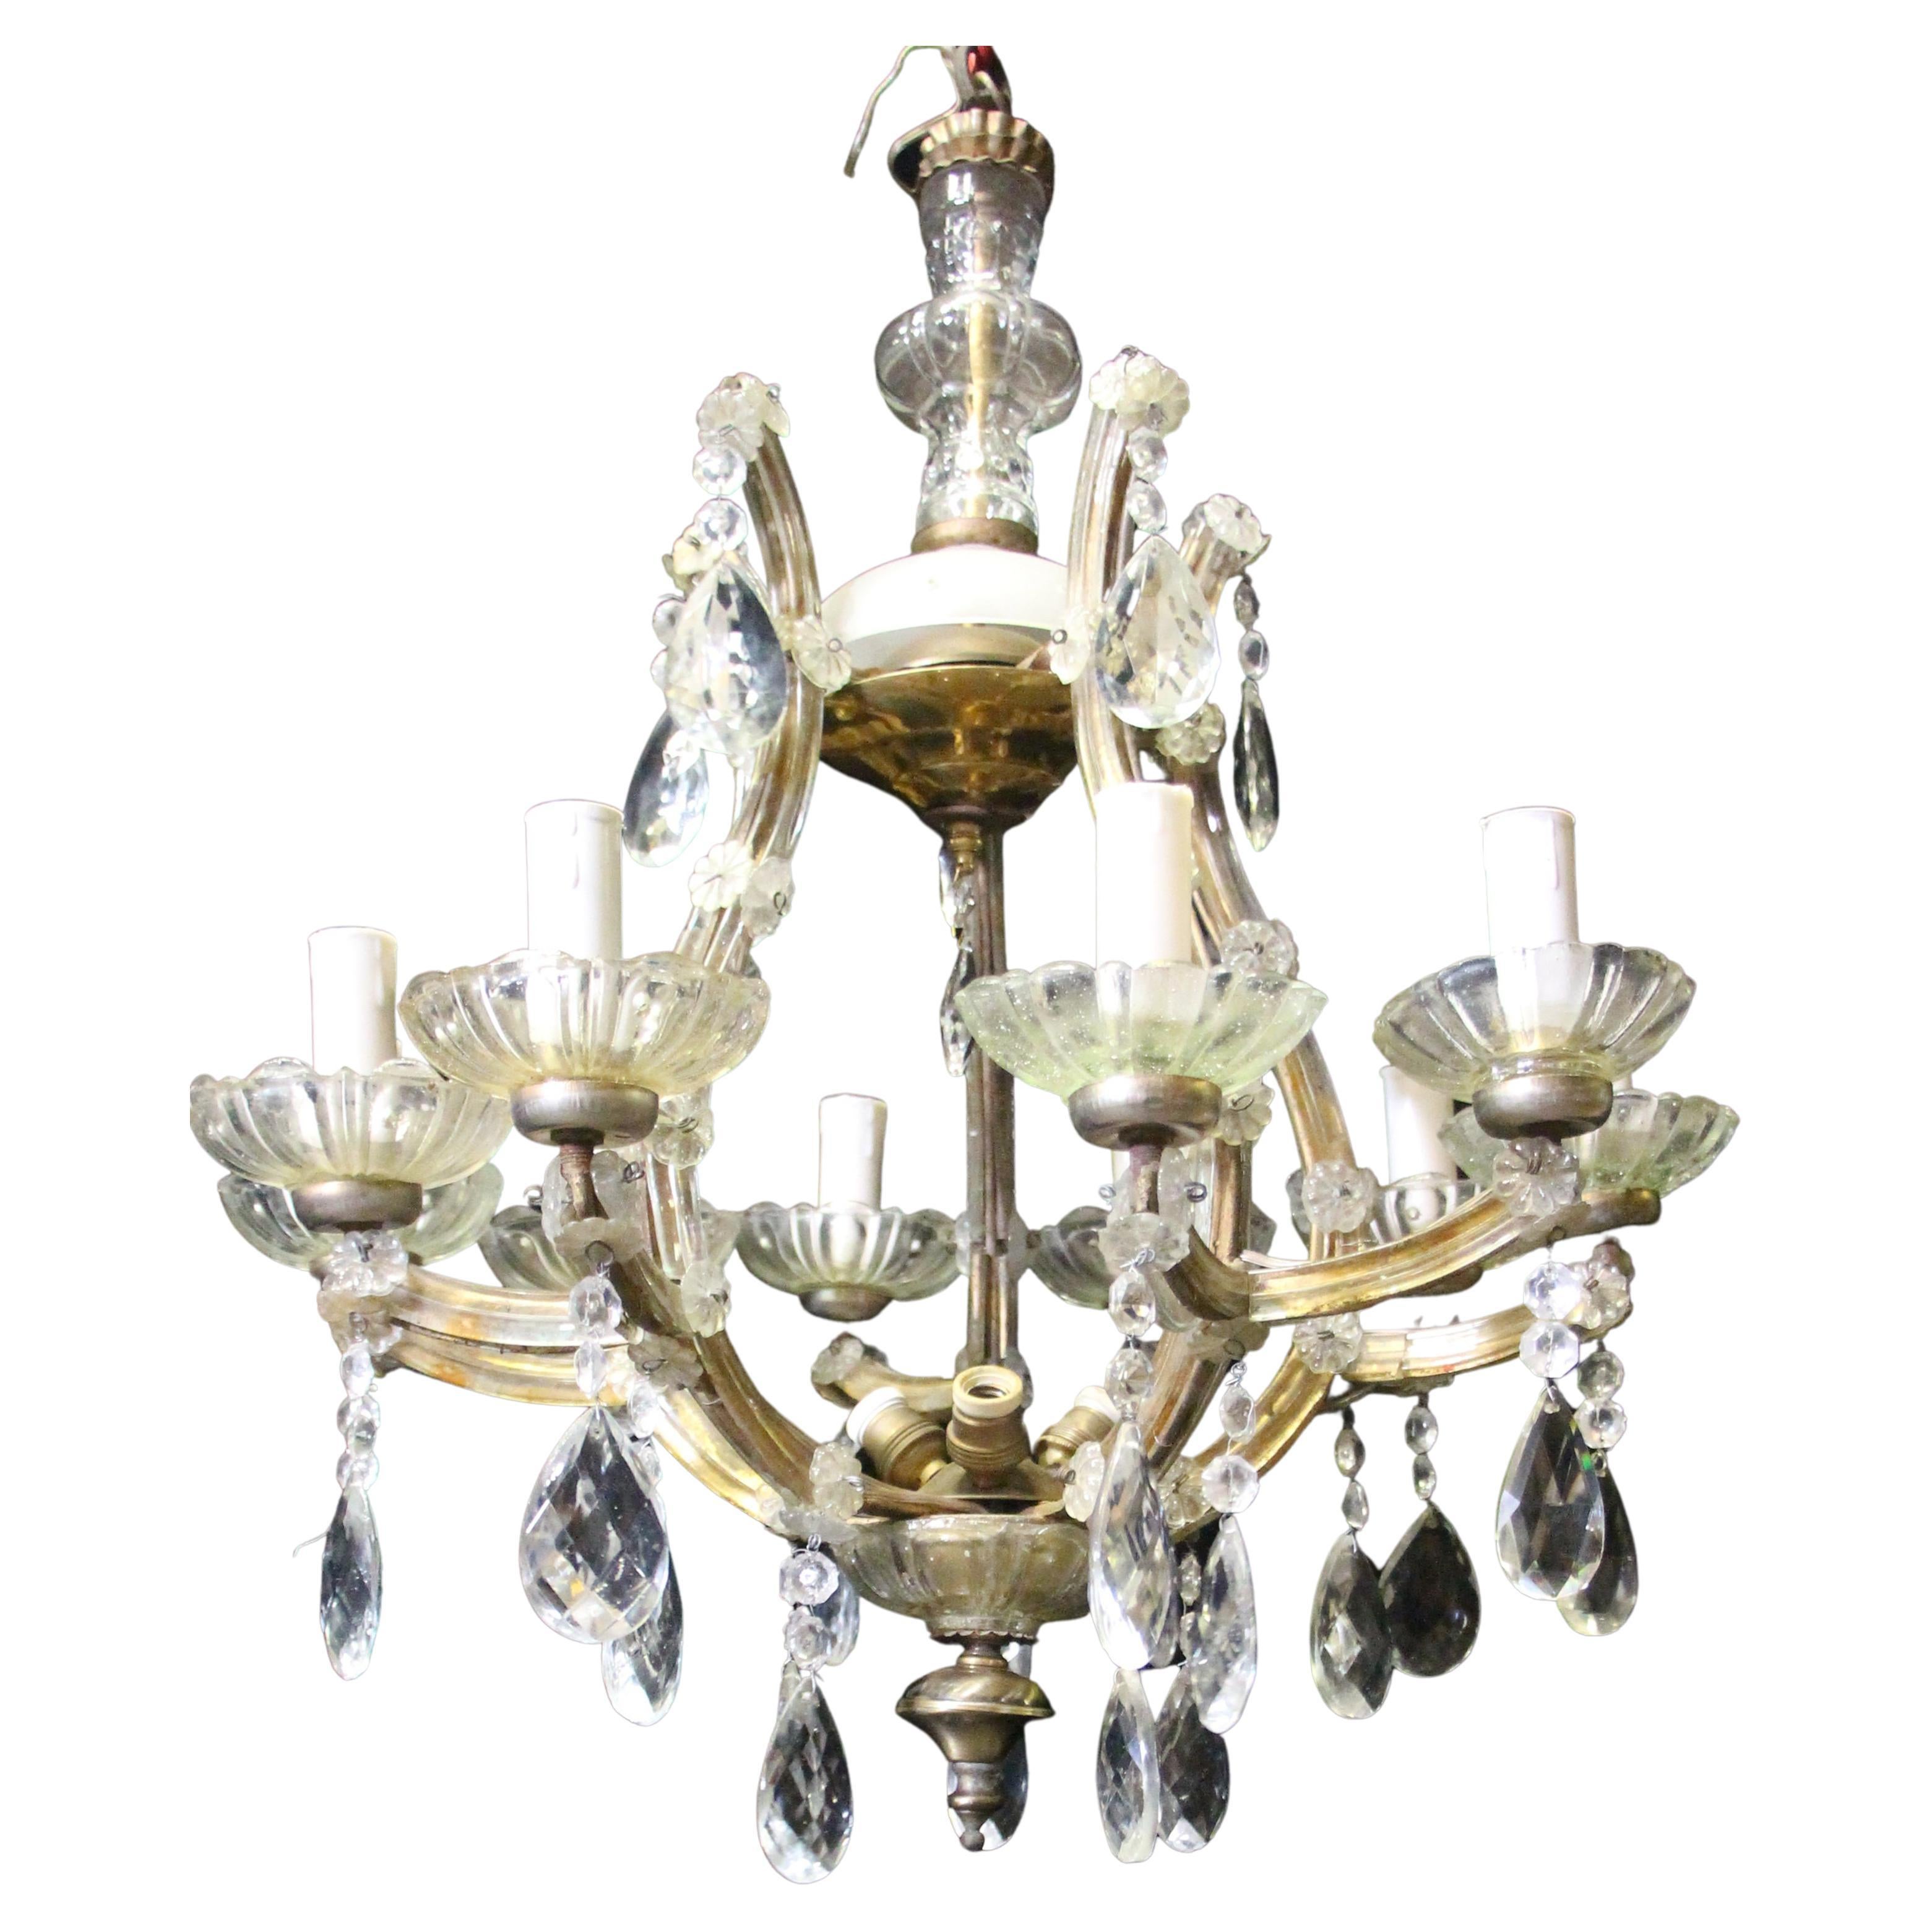 Antique Marie Therese Crystal 10 Arm Chandelier 13 Lights Small Petite